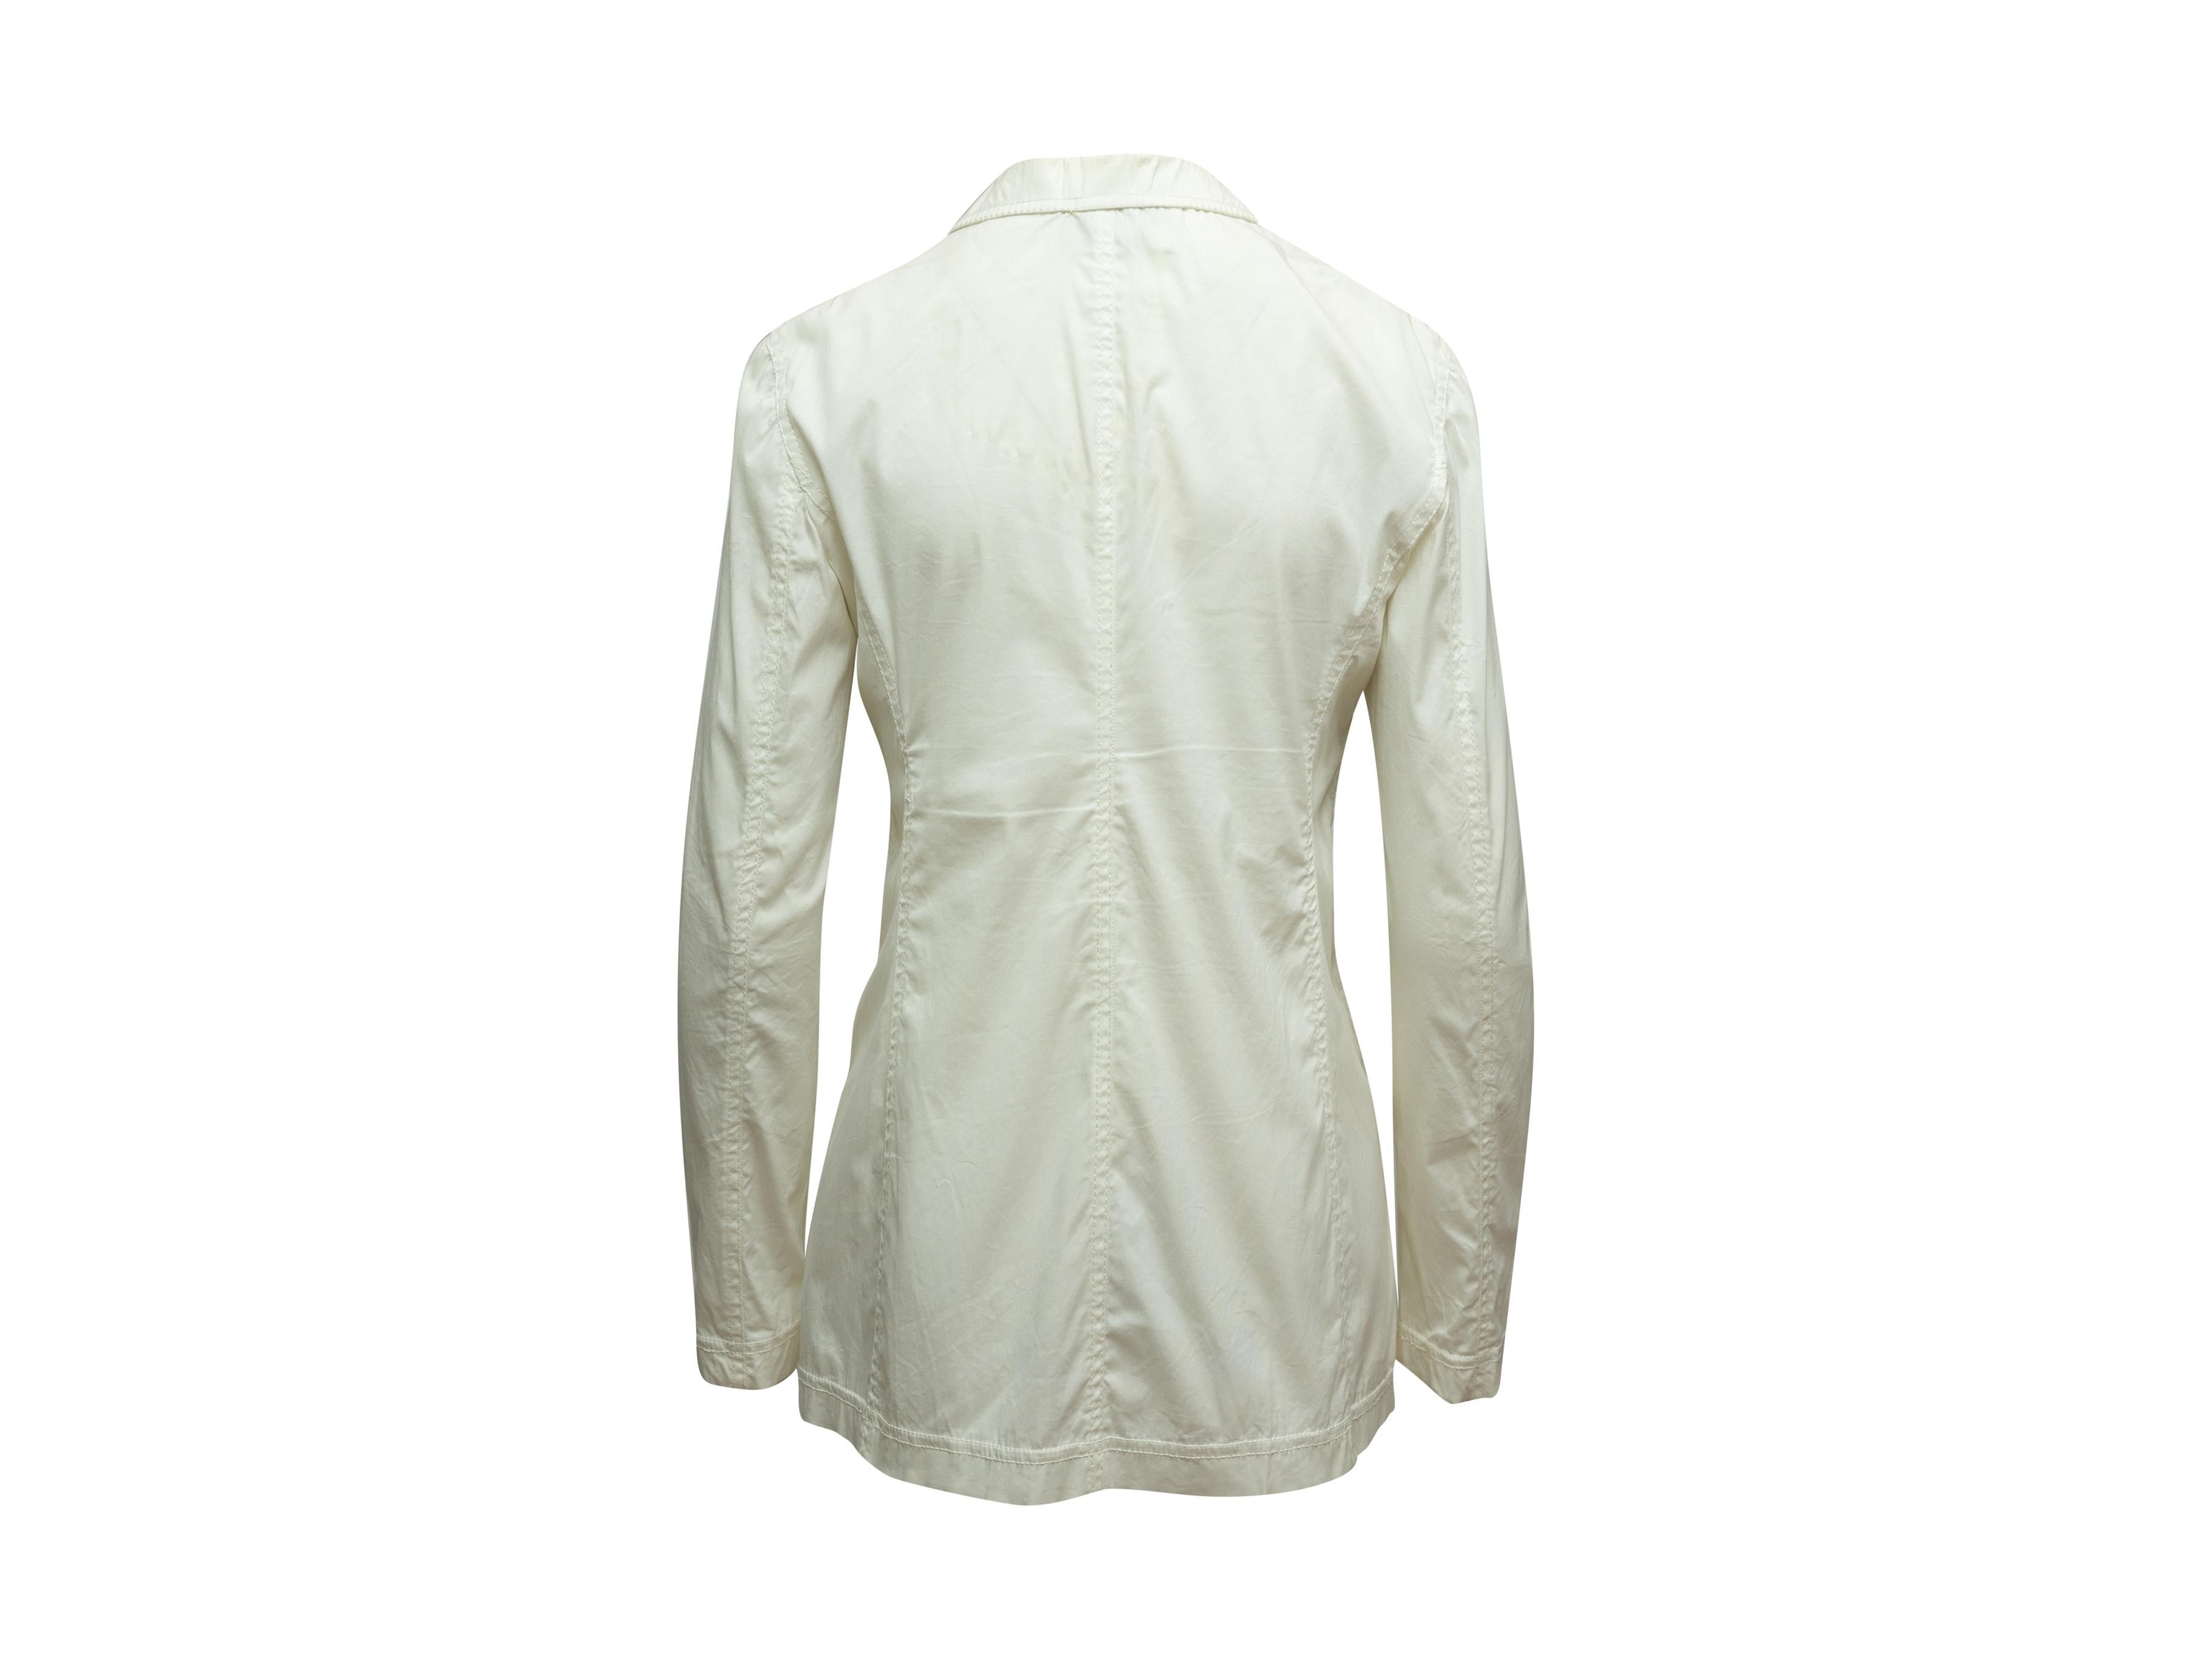 Product details: White long sleeve lightweight blazer by Prada. Notched collar. Three patch pockets. Button closures at center front. Designer size 44. 28